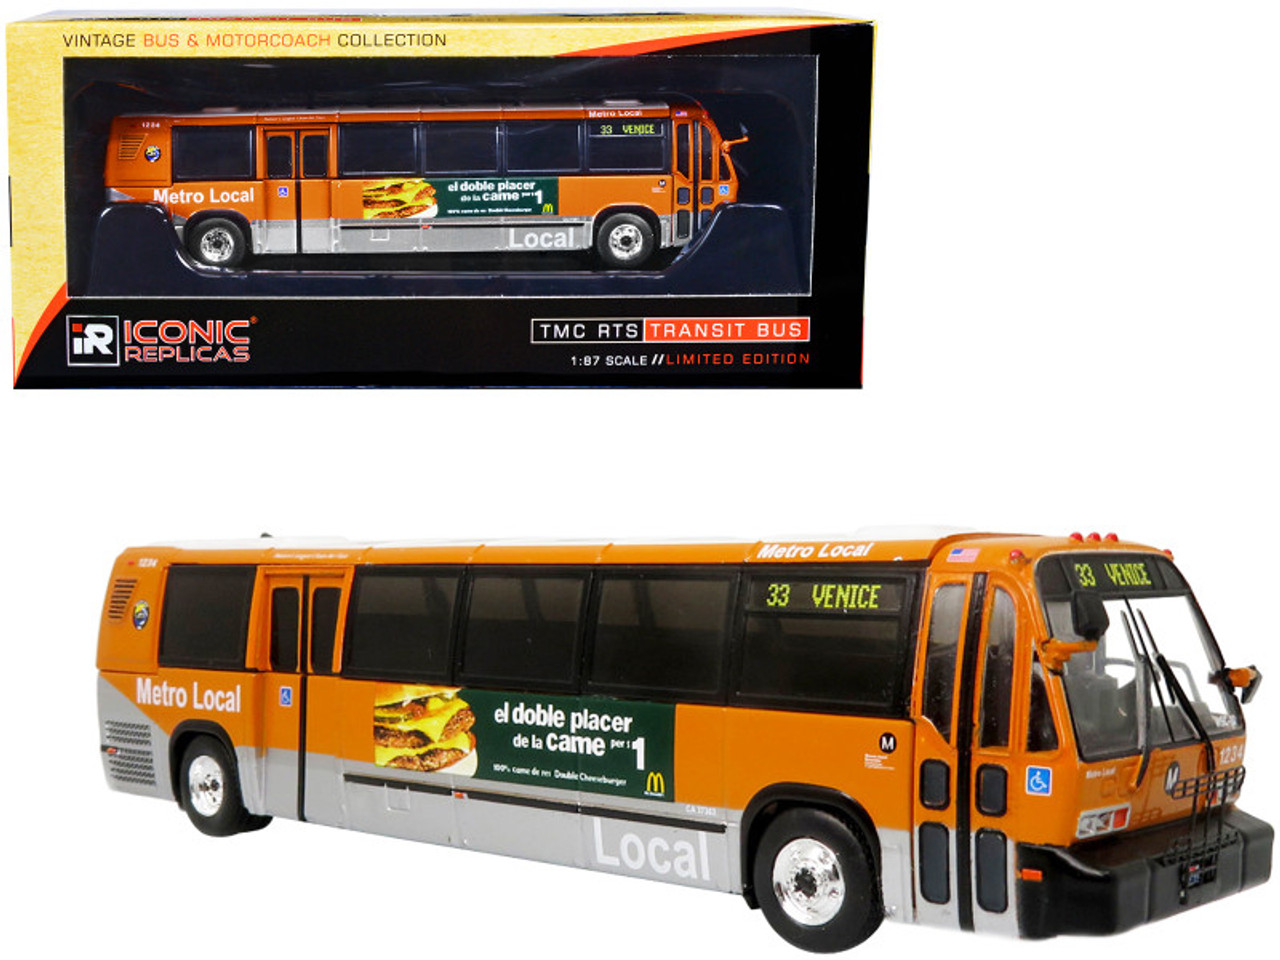 TMC RTS Transit Bus Metro Local Los Angeles "33 Venice" "Vintage Bus & Motorcoach Collection" 1/87 Diecast Model by Iconic Replicas